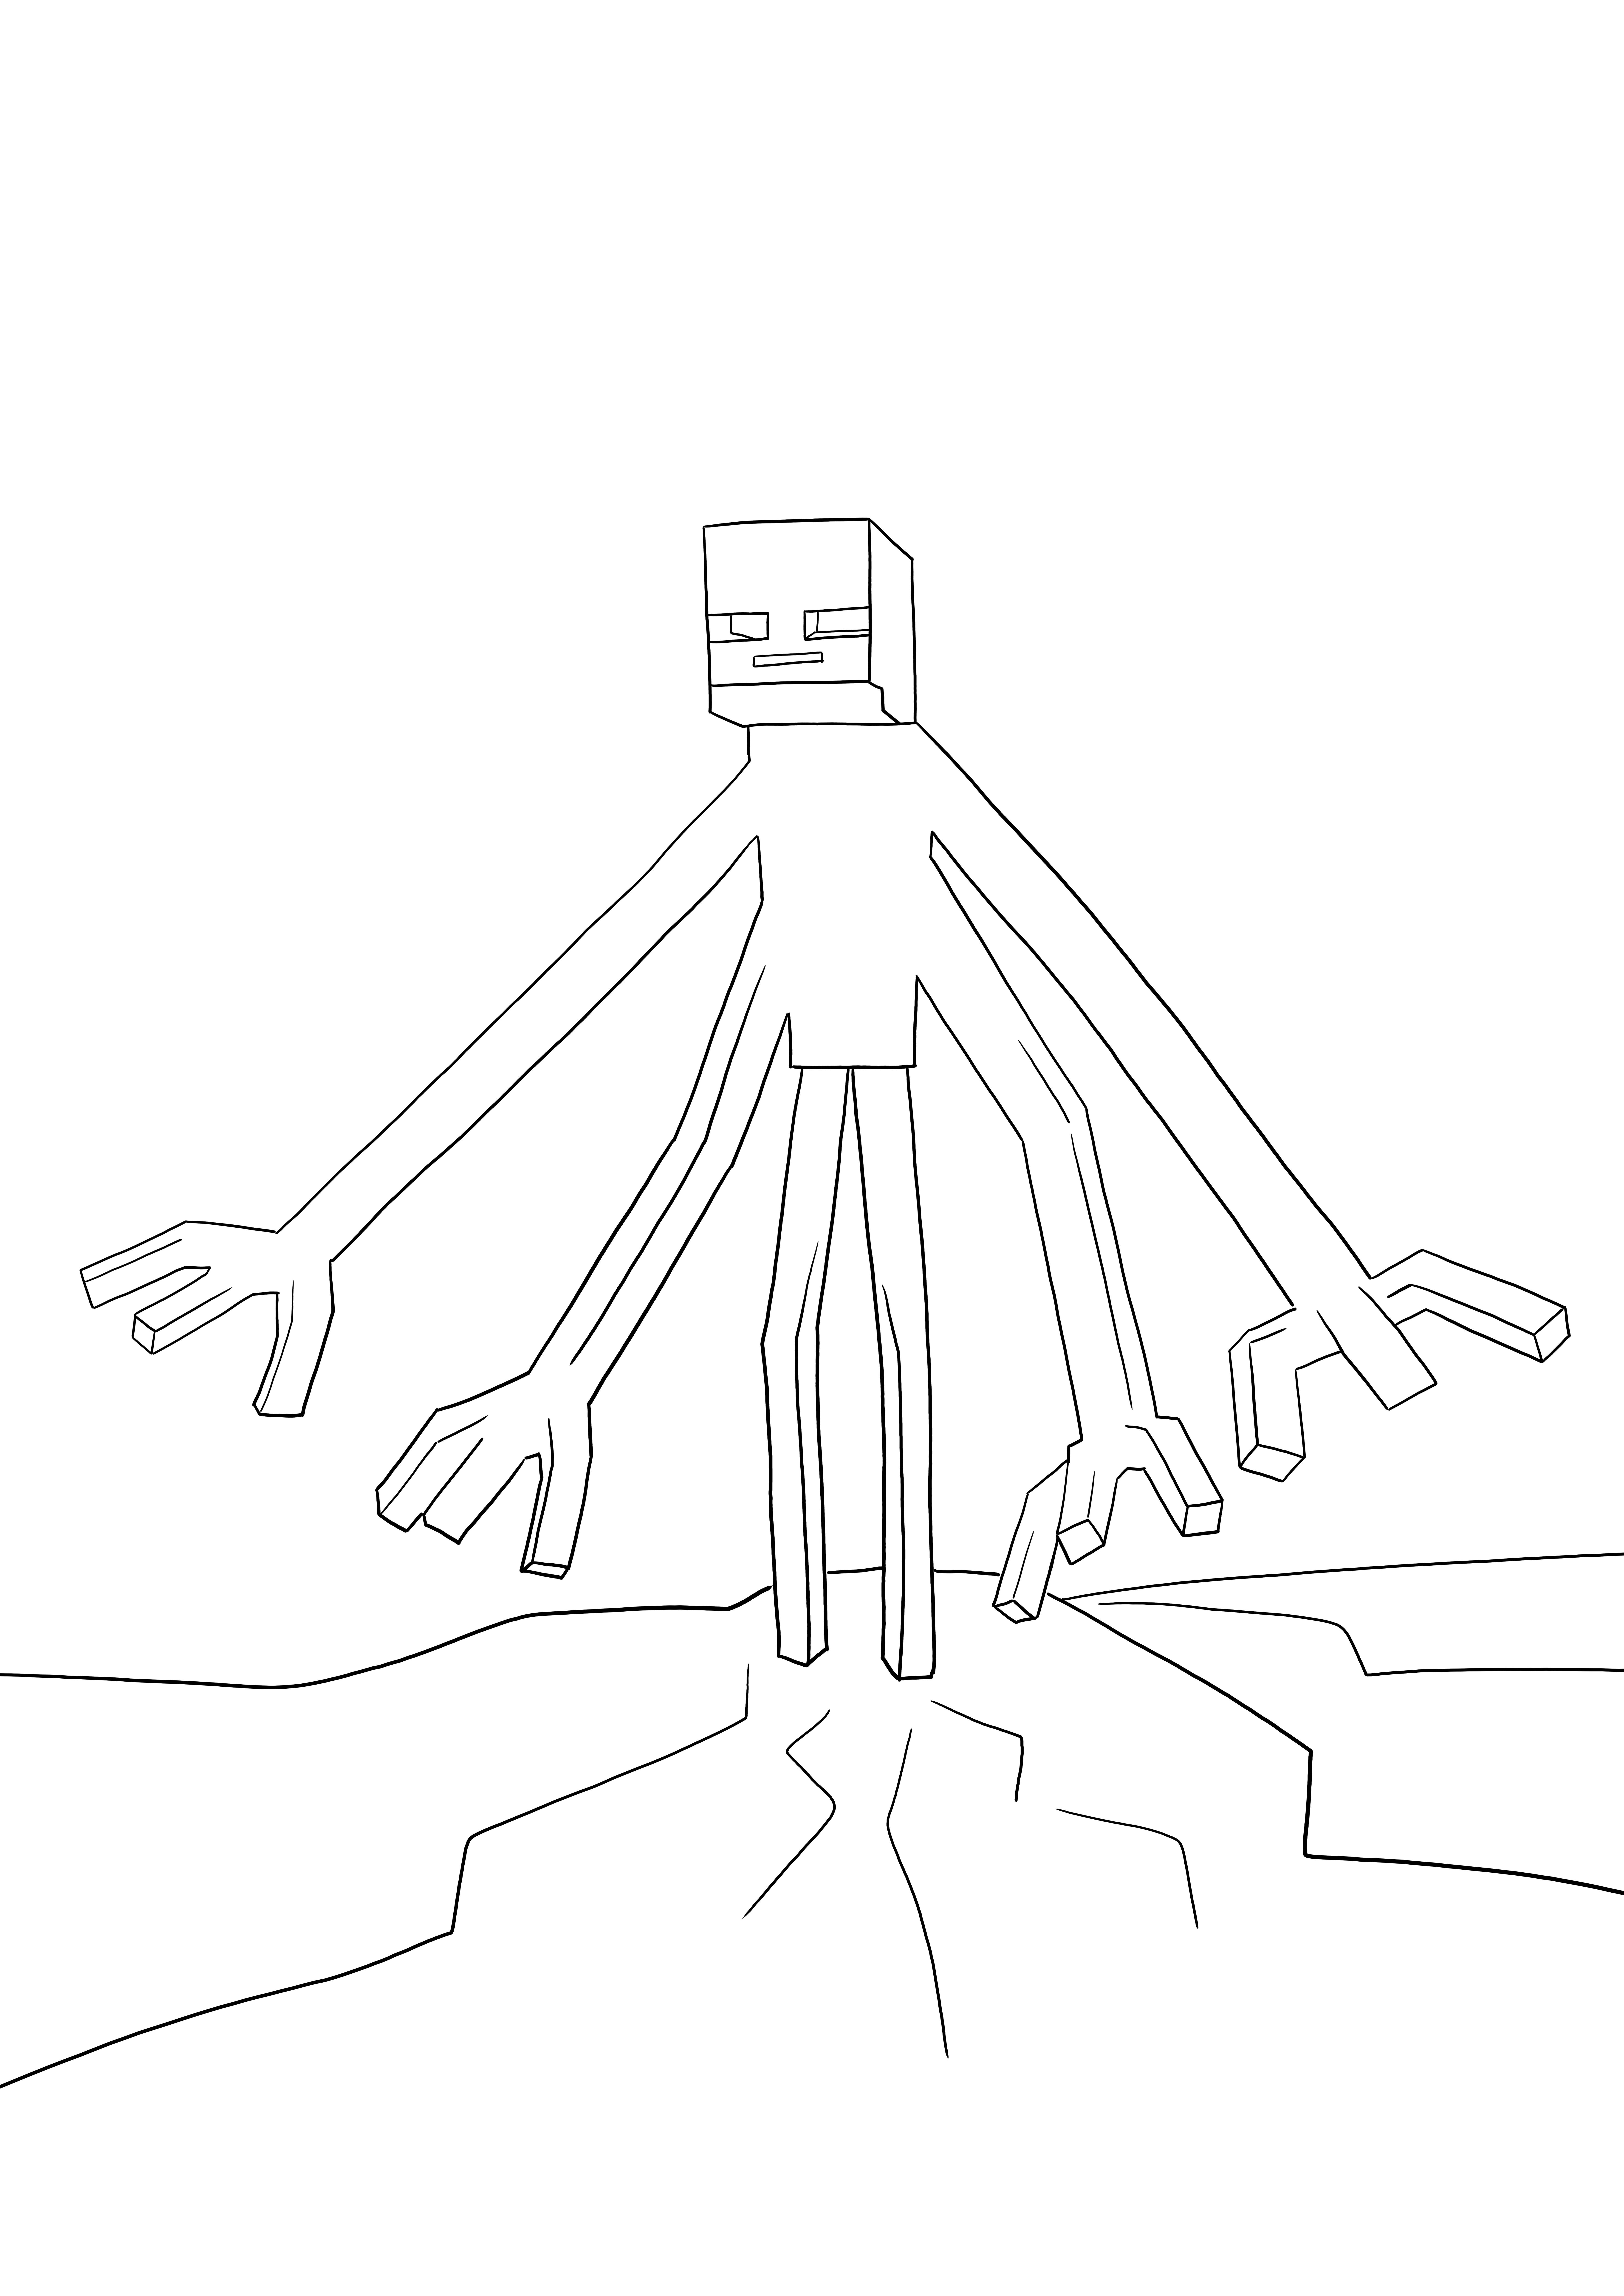 Enderman mutant from Minecraft to download for free and color